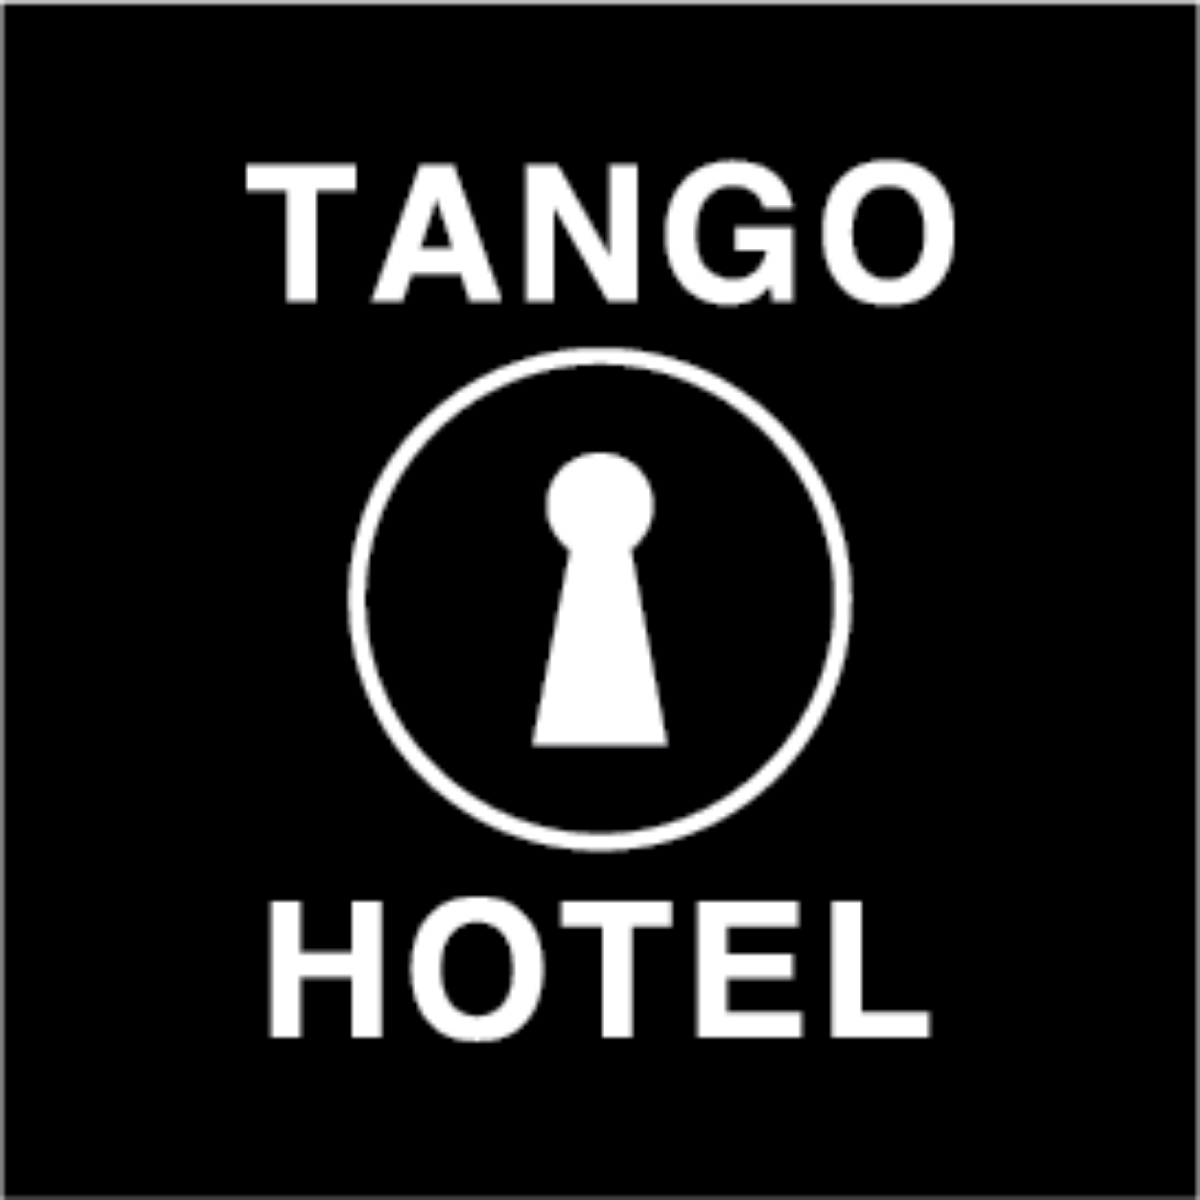 Stevie Williams and Saul Ezra of Tango Hotel: 5 Things You Need To